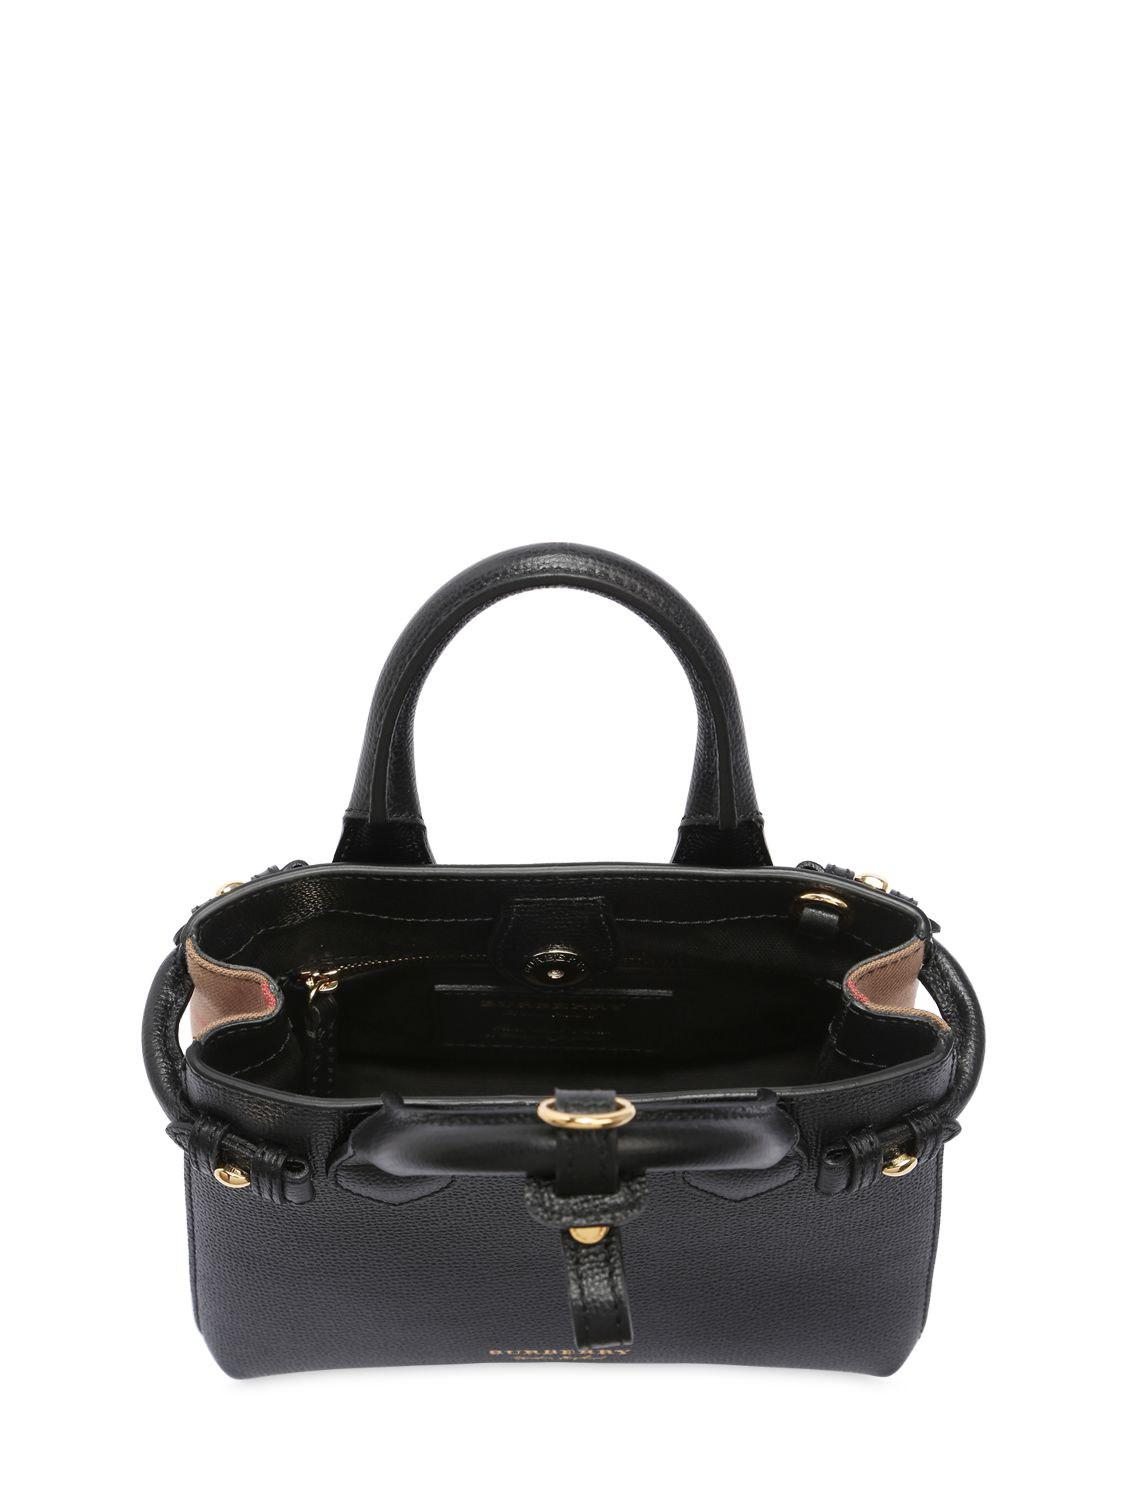 Burberry Baby Banner Leather & House Check Bag in Black | Lyst